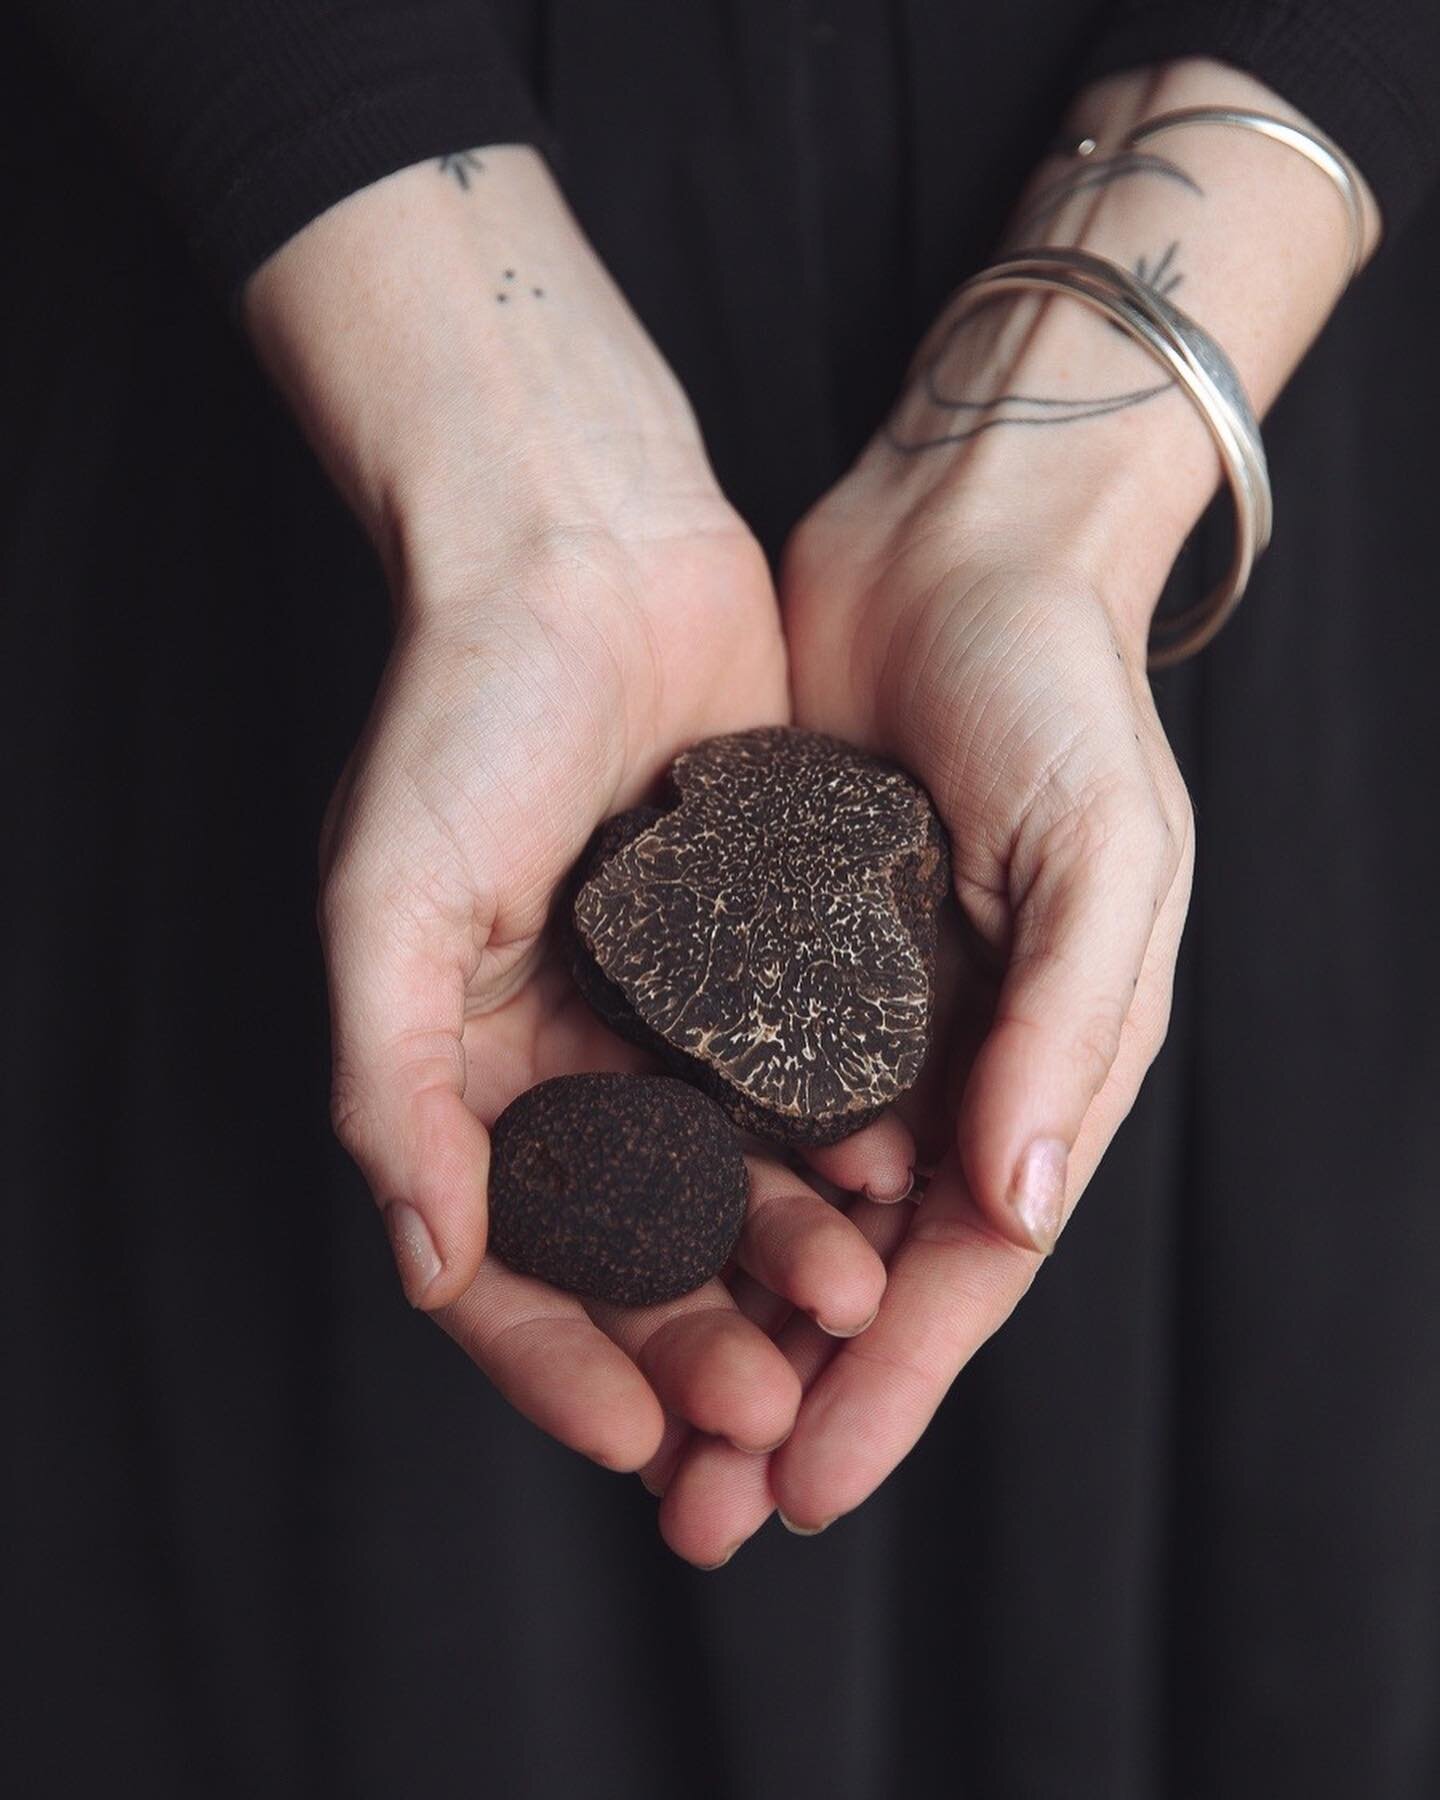 I&rsquo;m seeing truffle content everywhere and getting massive fomo. I want to eat those tasty little ground balls. 

Here is some from last year at @tempuskatoomba with hand modelling by @flora.folk and truffles from @kanimblavalleytruffles